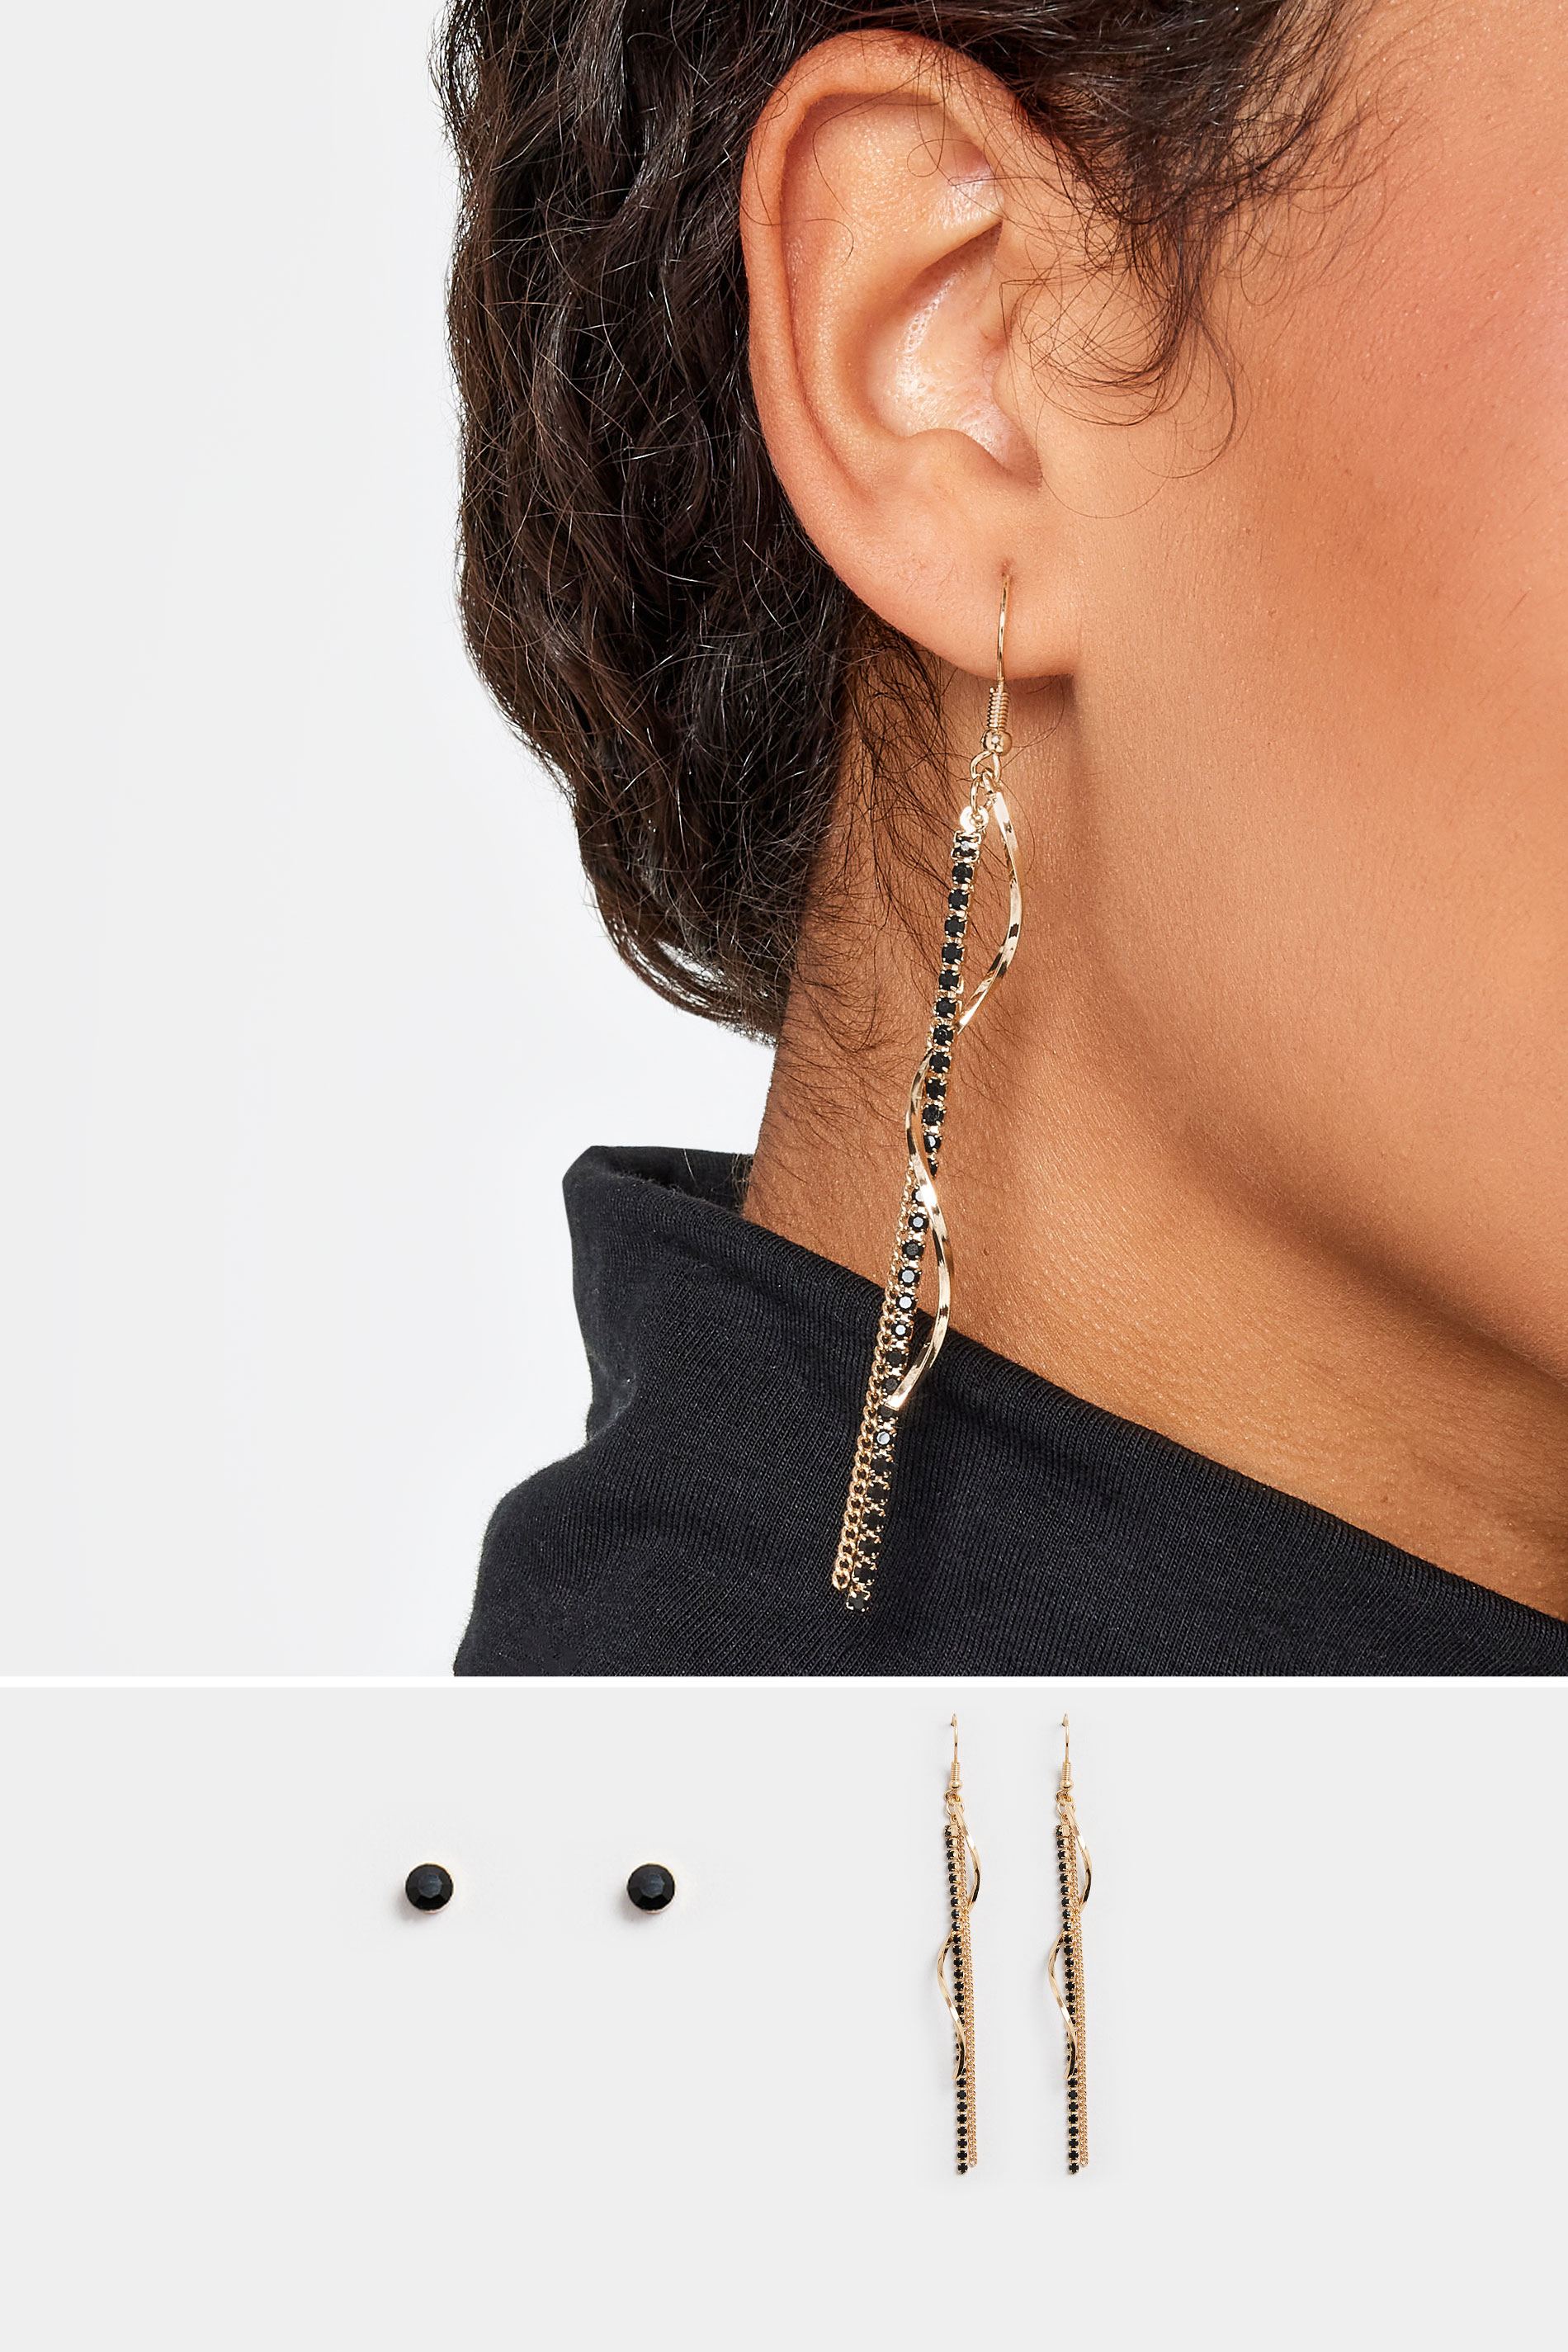 2 PACK Gold Tone Twisted Tassle & Stud Earring Set | Yours Clothing 1